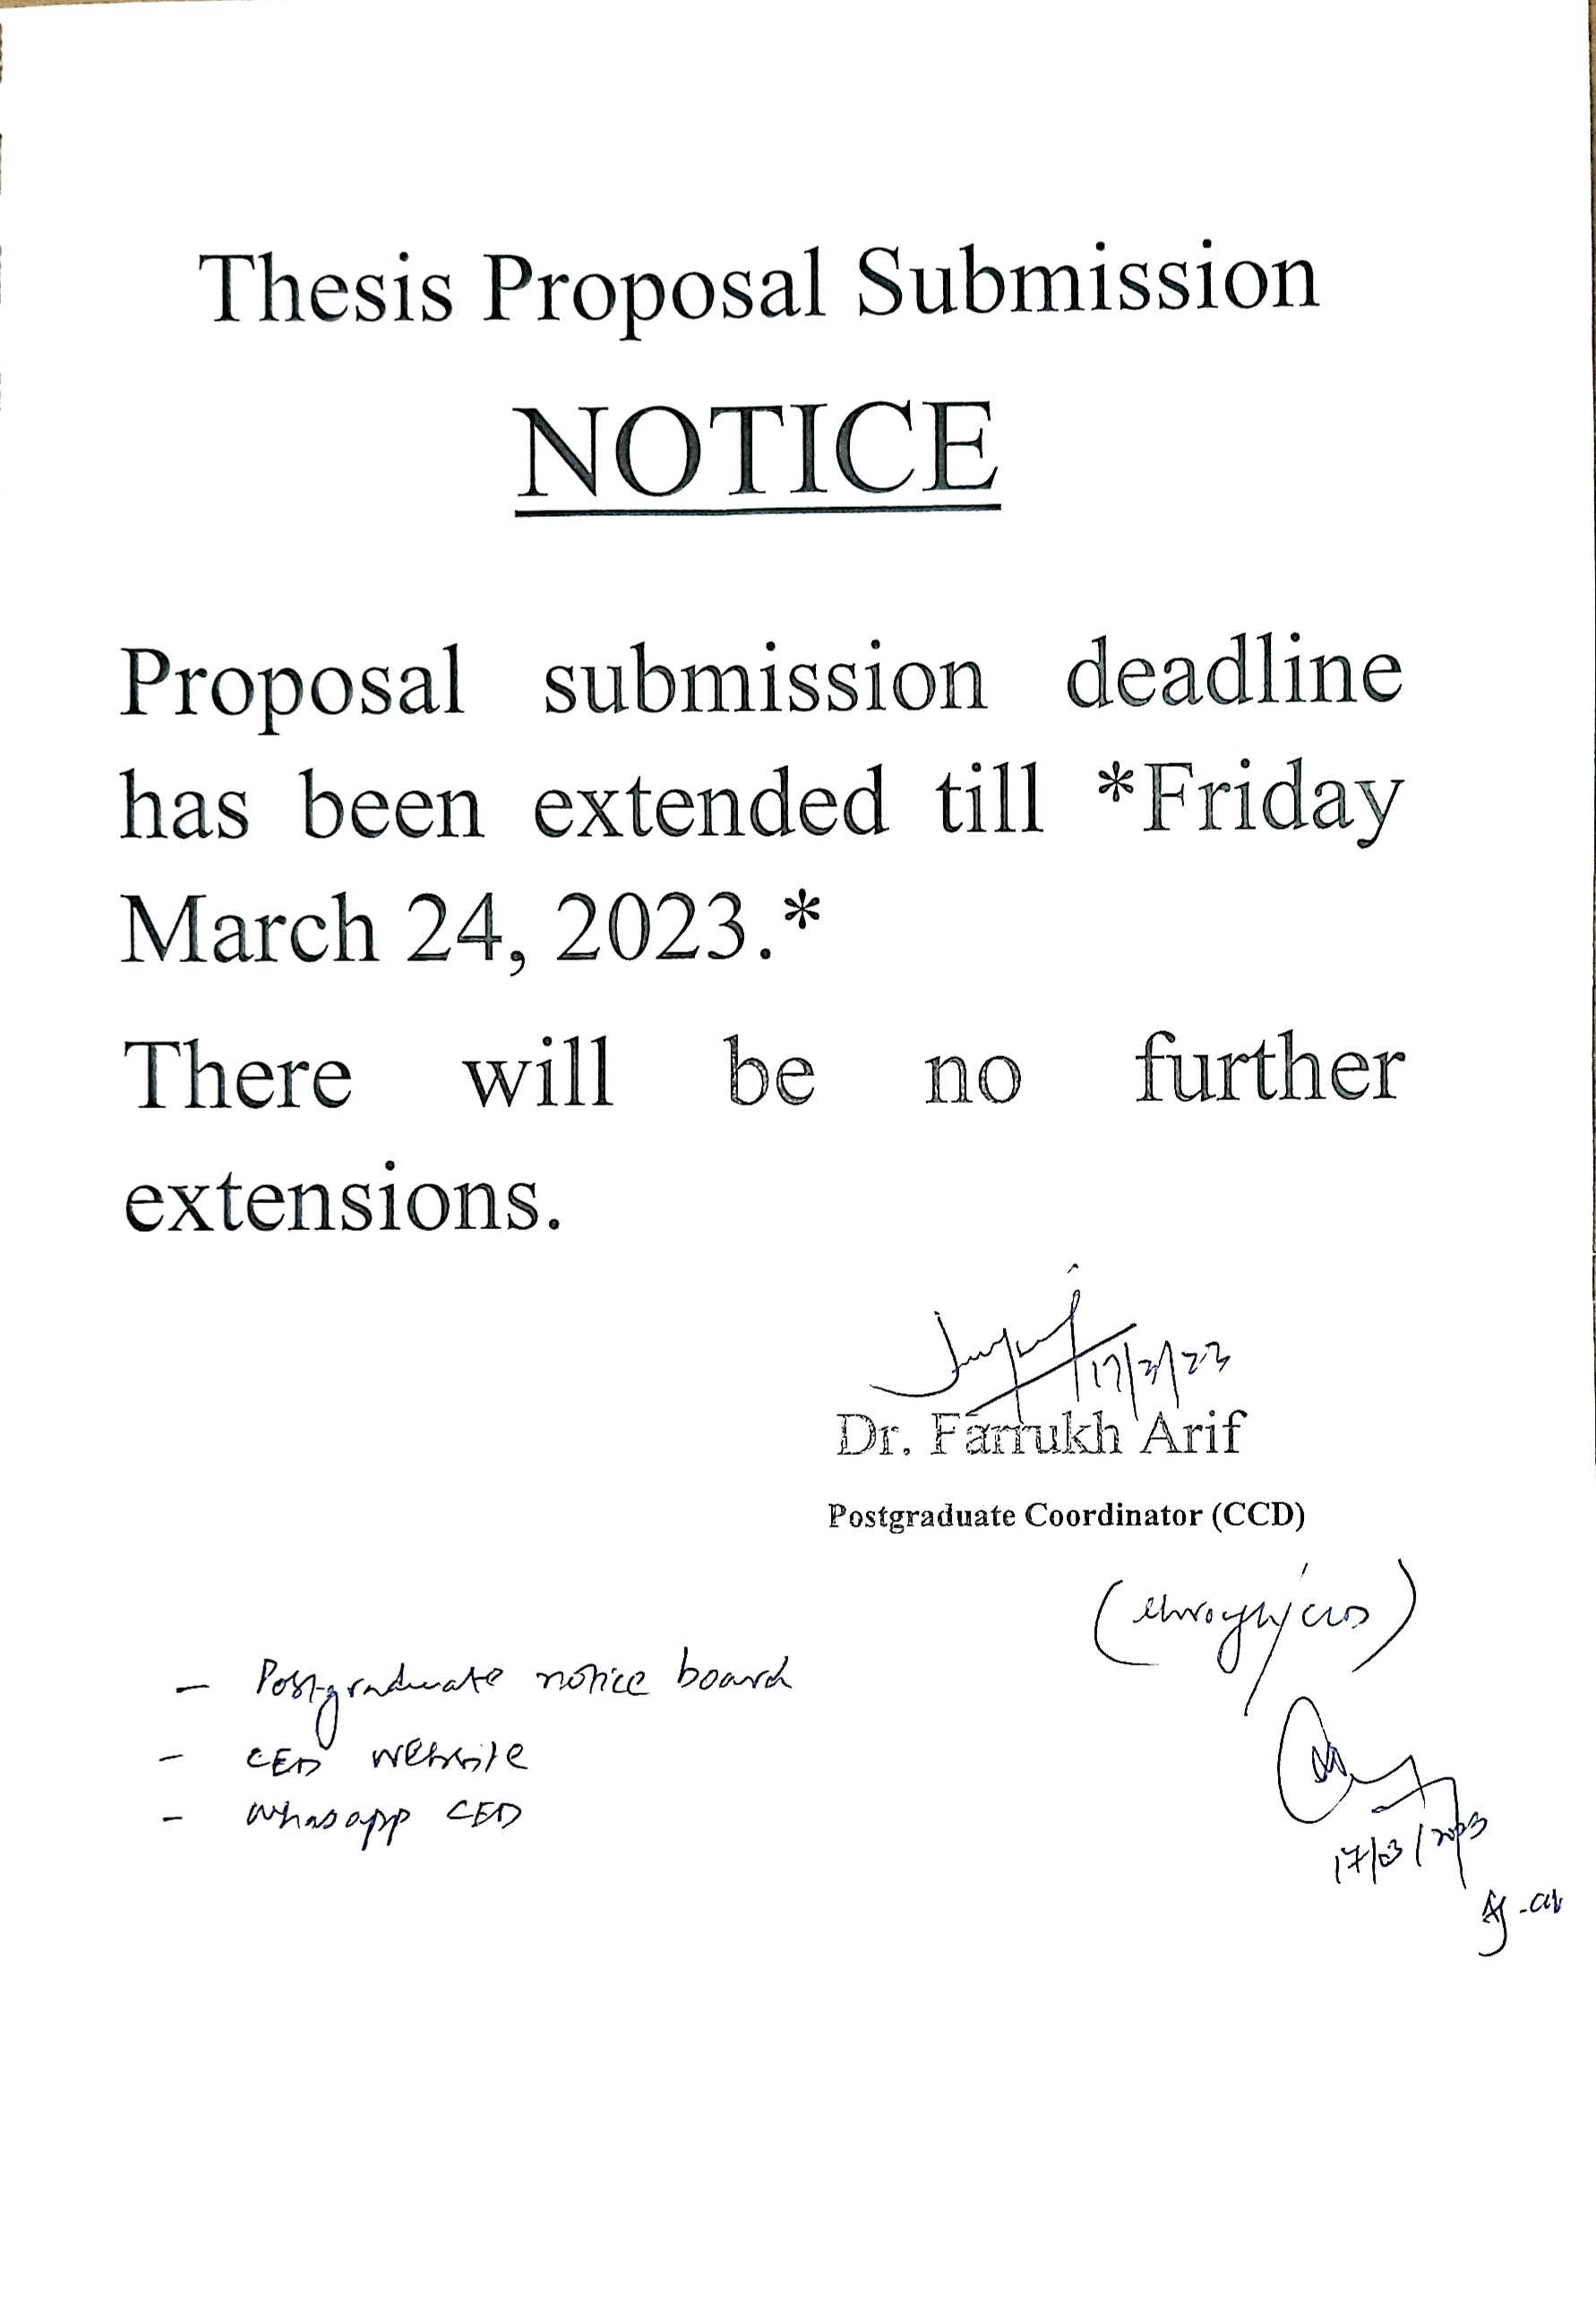 extension of thesis submission